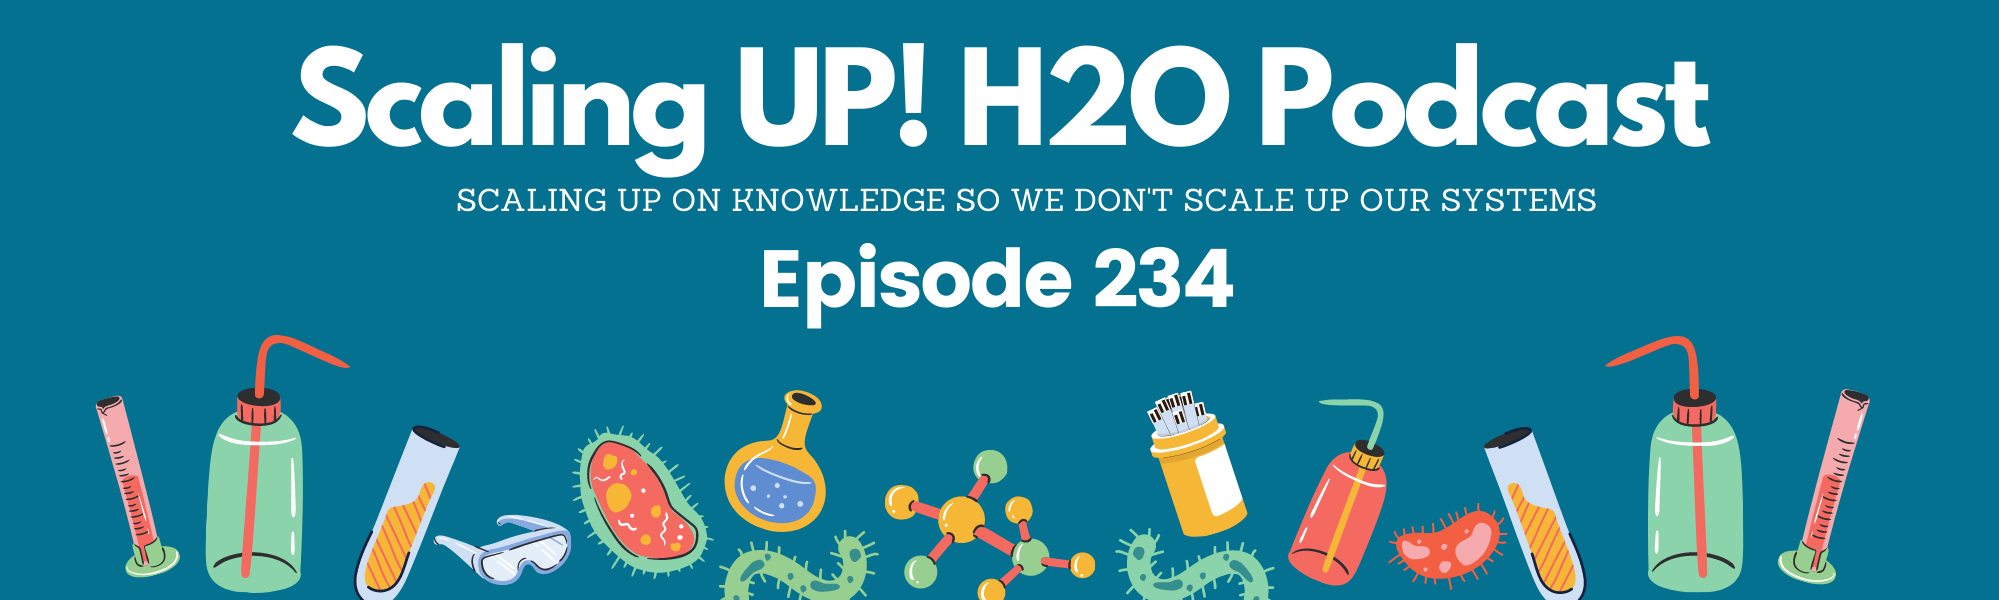 234 The One About How To Align Sales and Marketing To Drive Accelerated Growth - Scaling UP! H2O